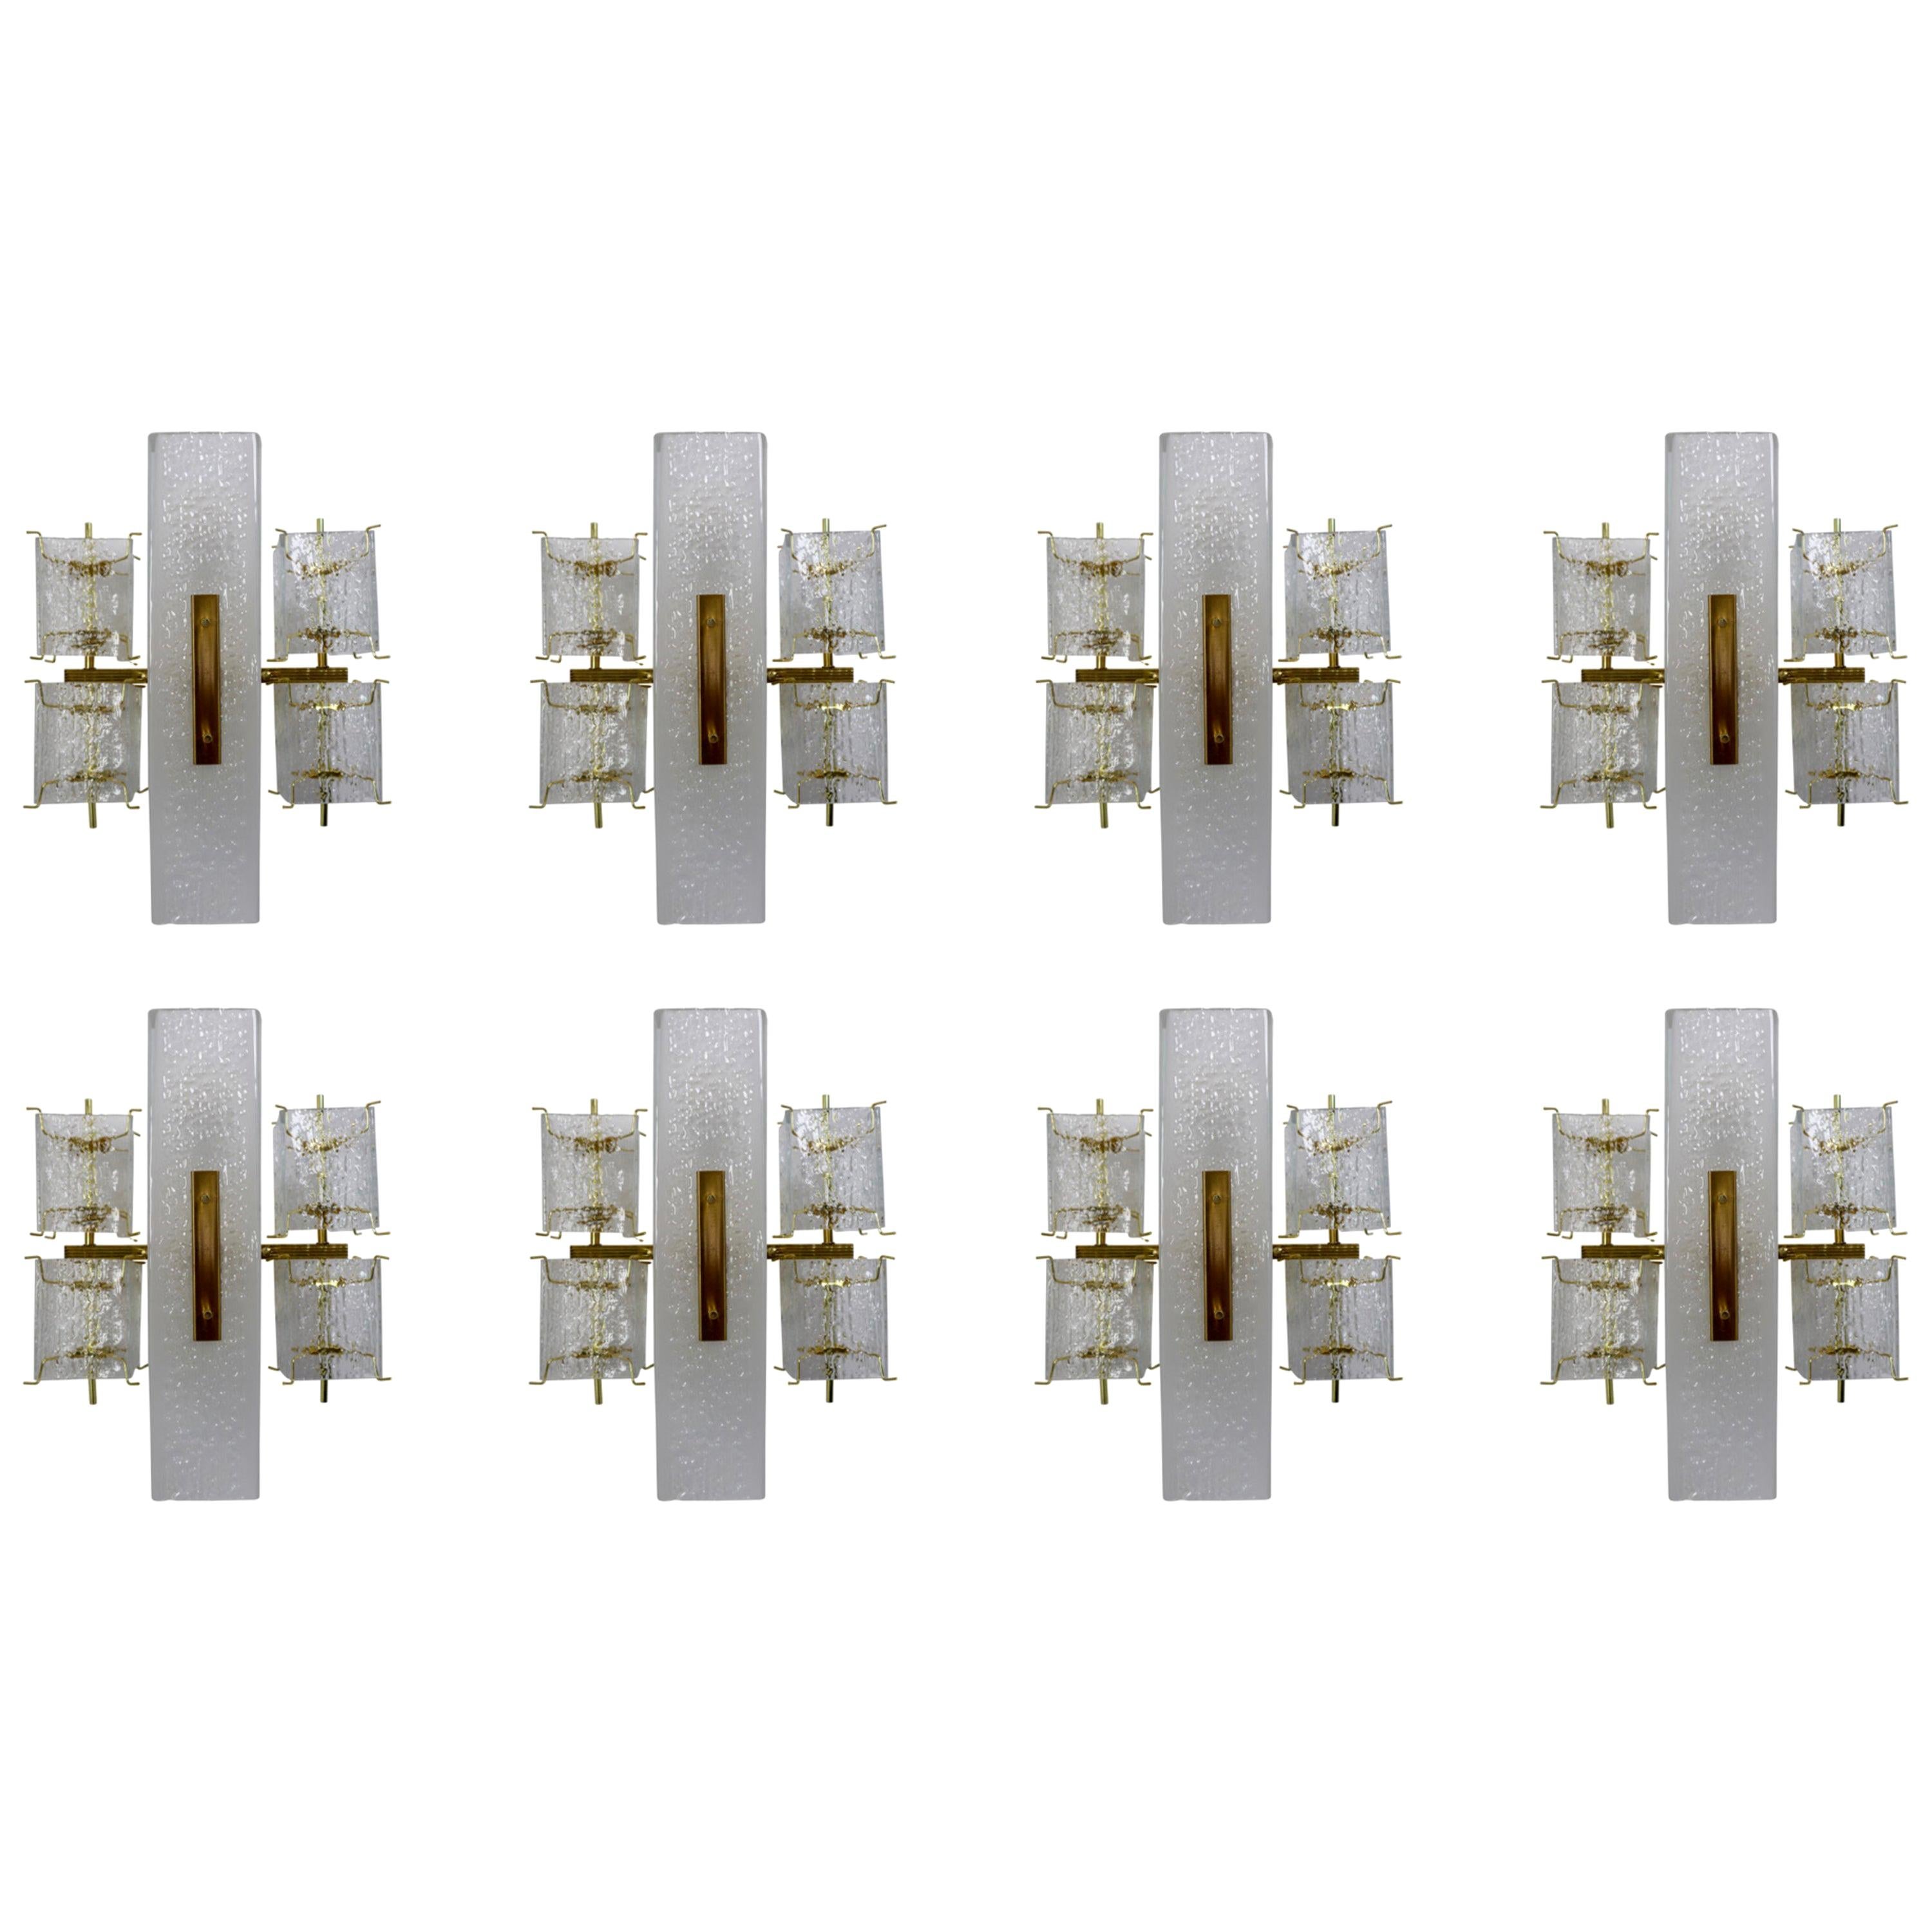 1 of 8 Midcentury Wall Lights with Structured Glass and Brass, Europe, 1970s For Sale